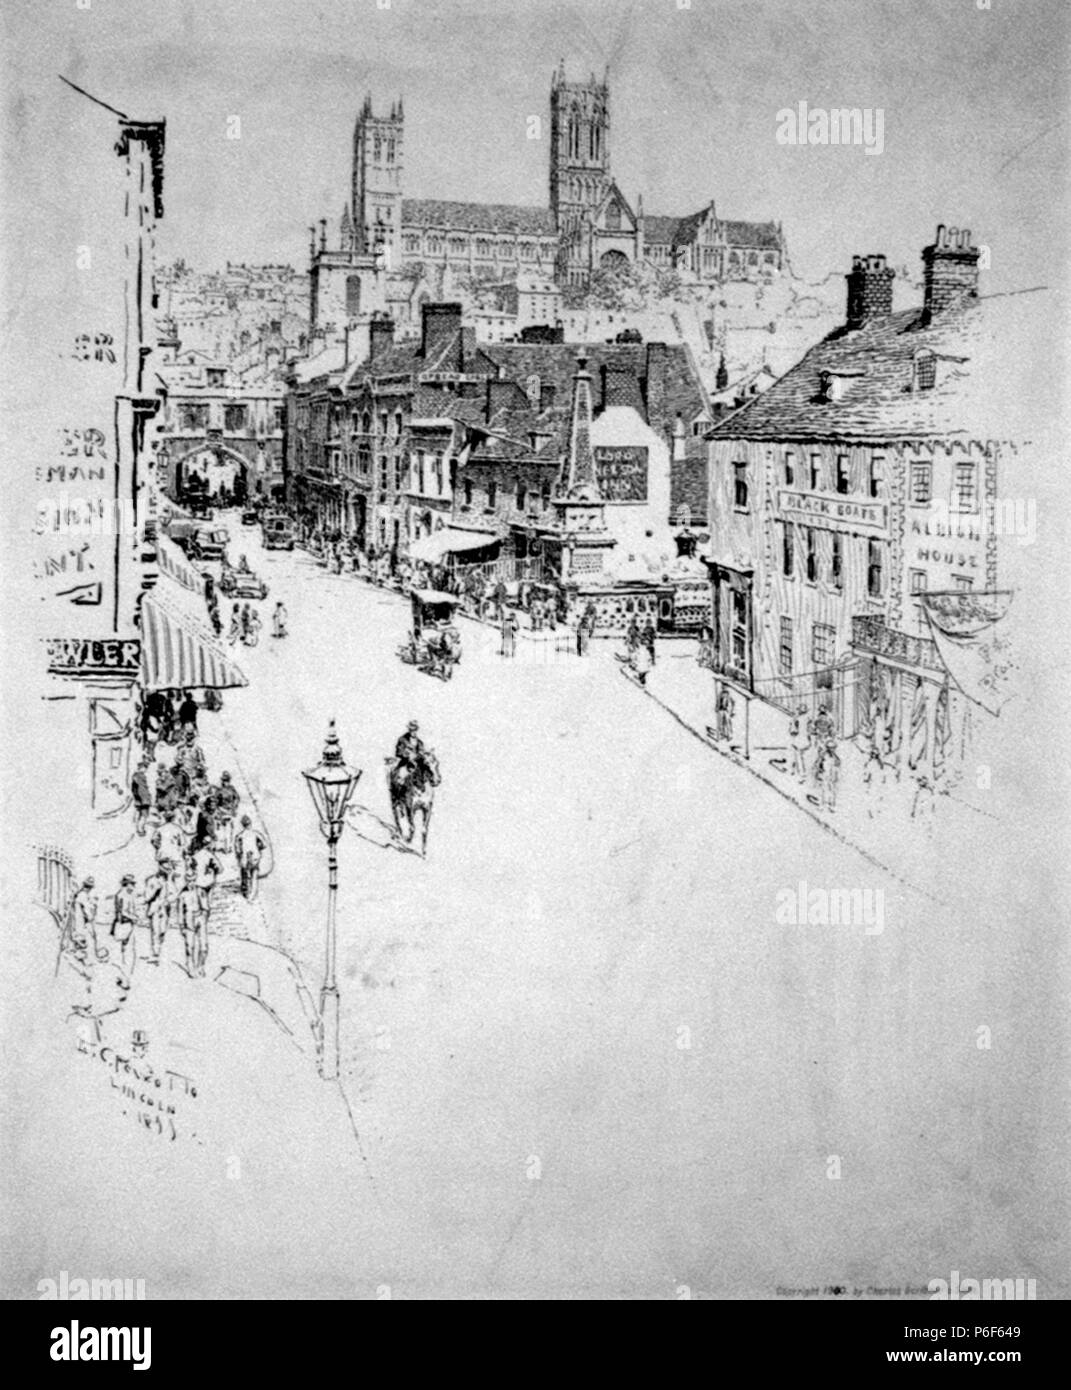 English: High Street, Lincoln, Lincolnshire, England. Published in: 'Oliver Cromwell' by Theodore Roosevelt, Scribner's magazine, 27:147 (Feb. 1900). 1899 41 Ernest Peixotto, High Street, Lincoln, 1899 Stock Photo